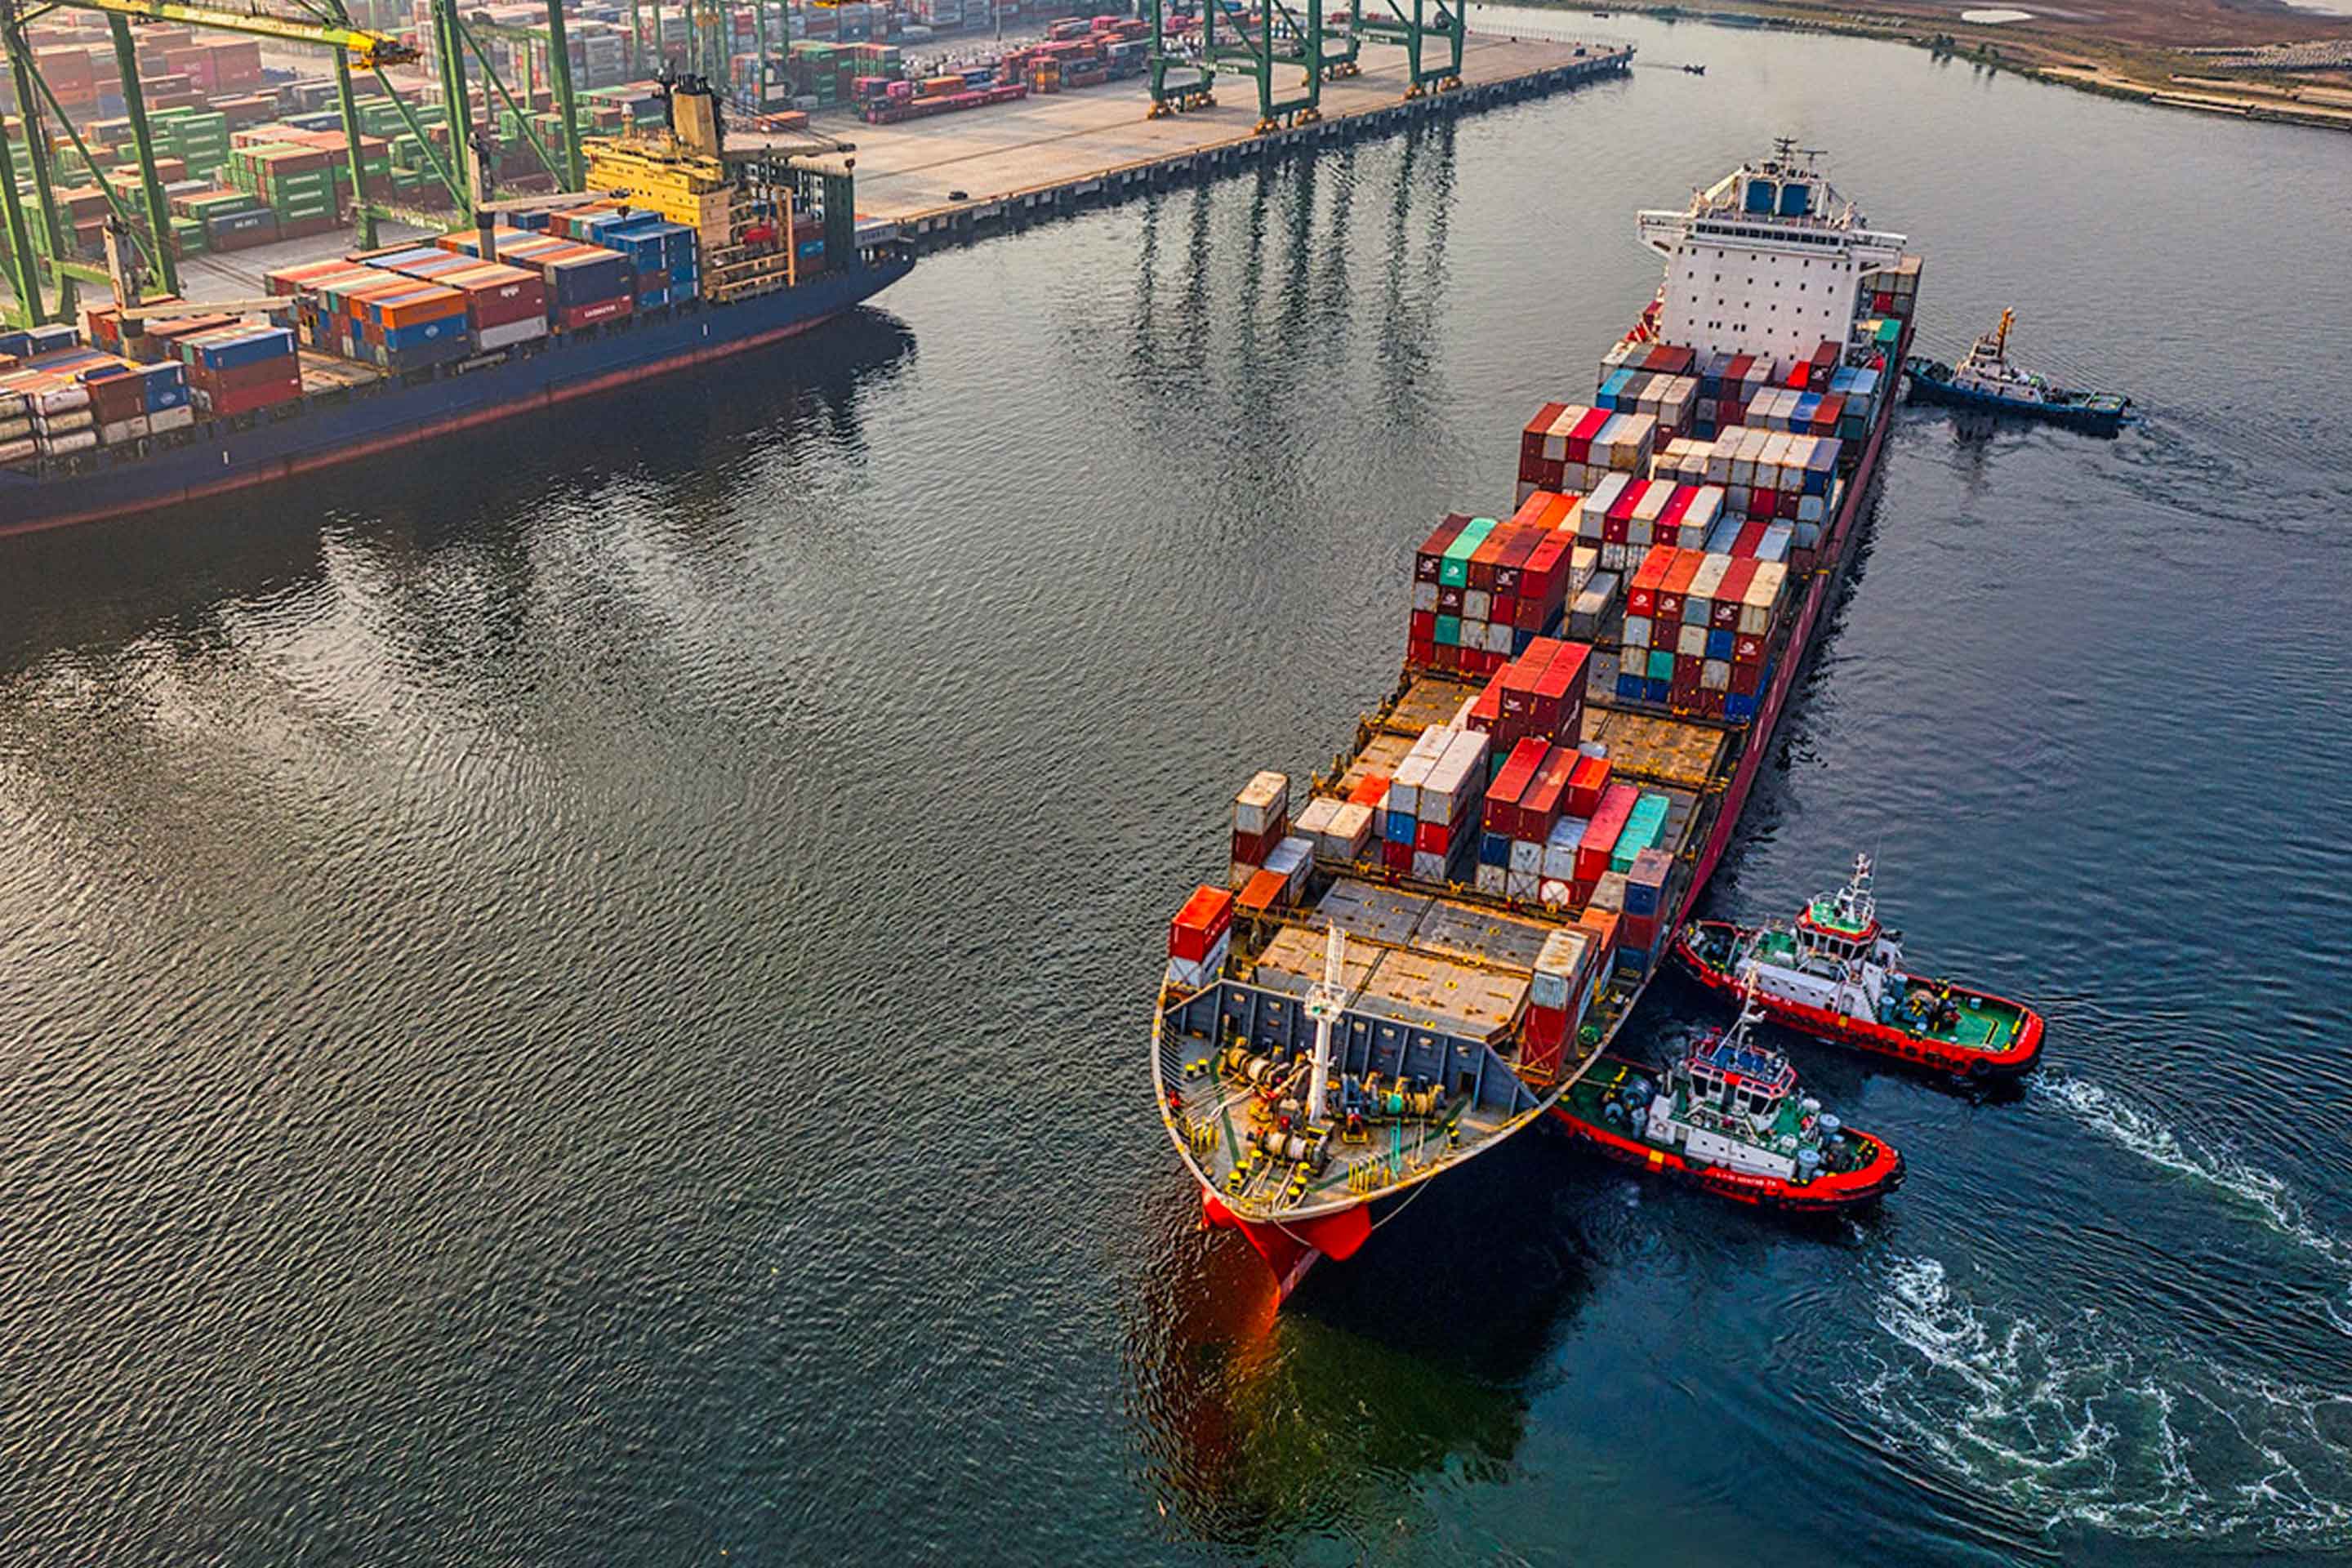 An image of ships in a dock to highlight decarbonization in the maritime industry